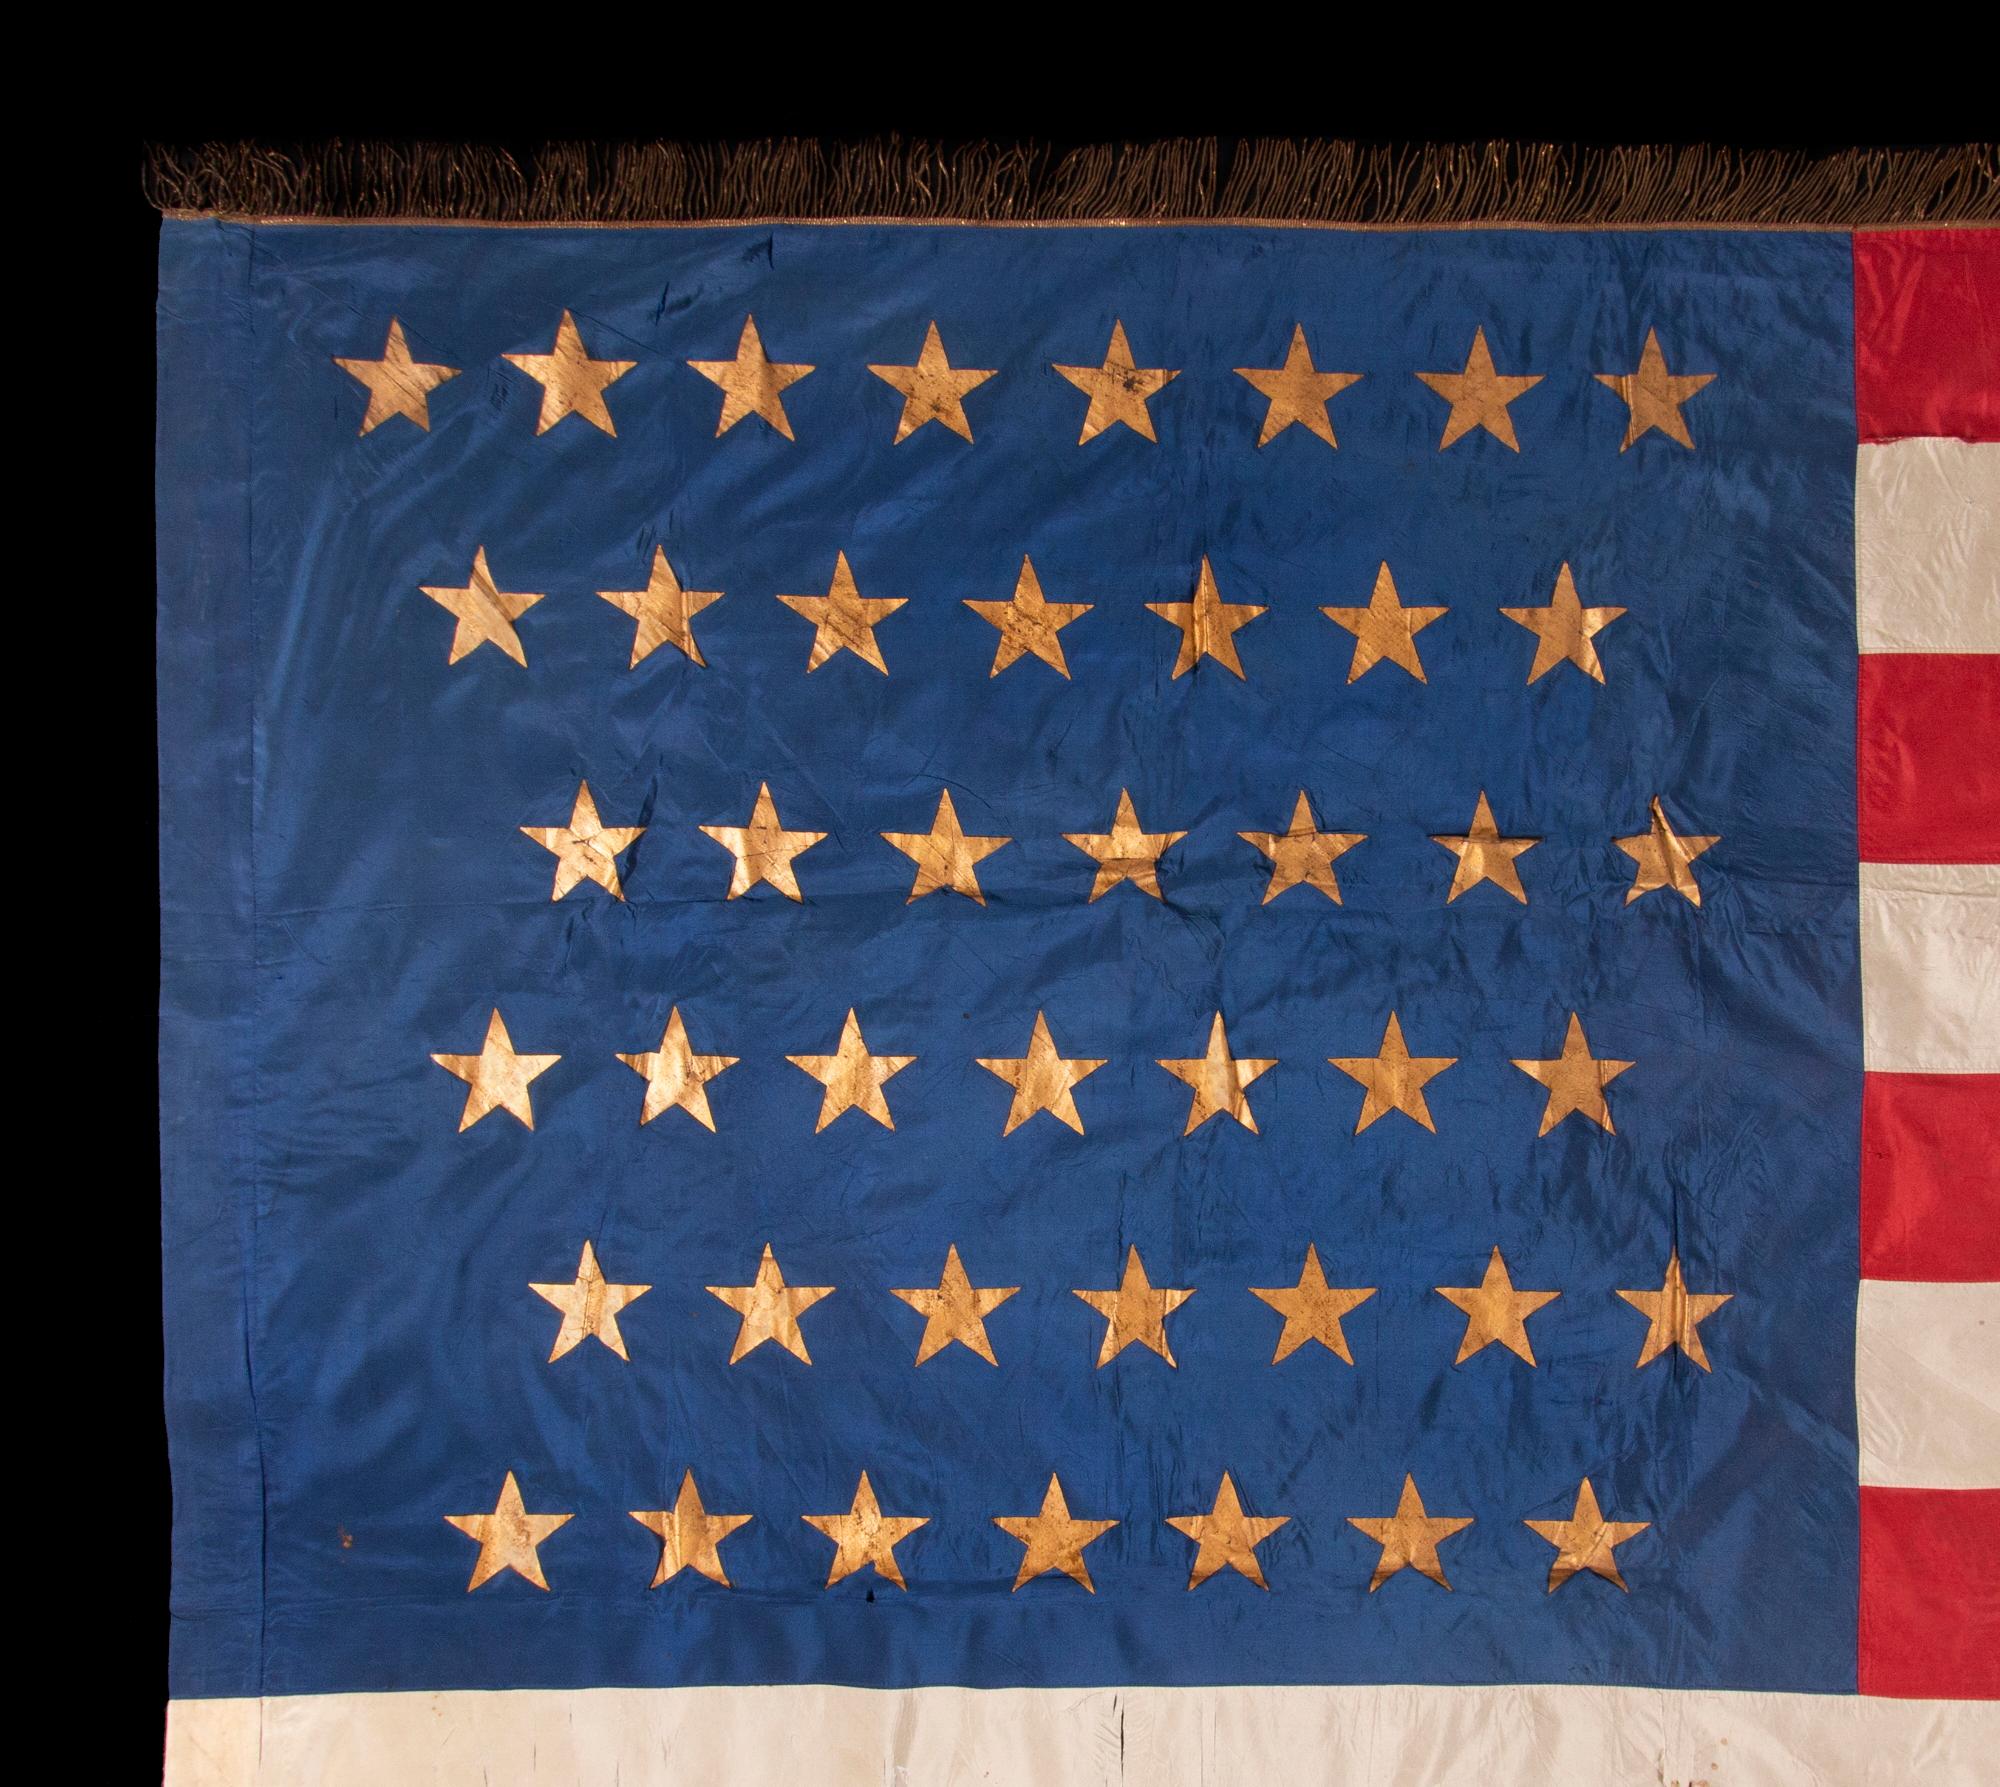 43 GILT-PAINTED STARS ON A SILK, ANTIQUE AMERICAN FLAG WITH BULLION FRINGE; REFLECTS THE ADDITION OF IDAHO AS THE 43RD STATE ON JULY 3RD, 1890, ONE OF THE RAREST STAR COUNTS AMONG SURVIVING AMERICAN FLAGS OF THE 19TH CENTURY

Numerous flags appeared